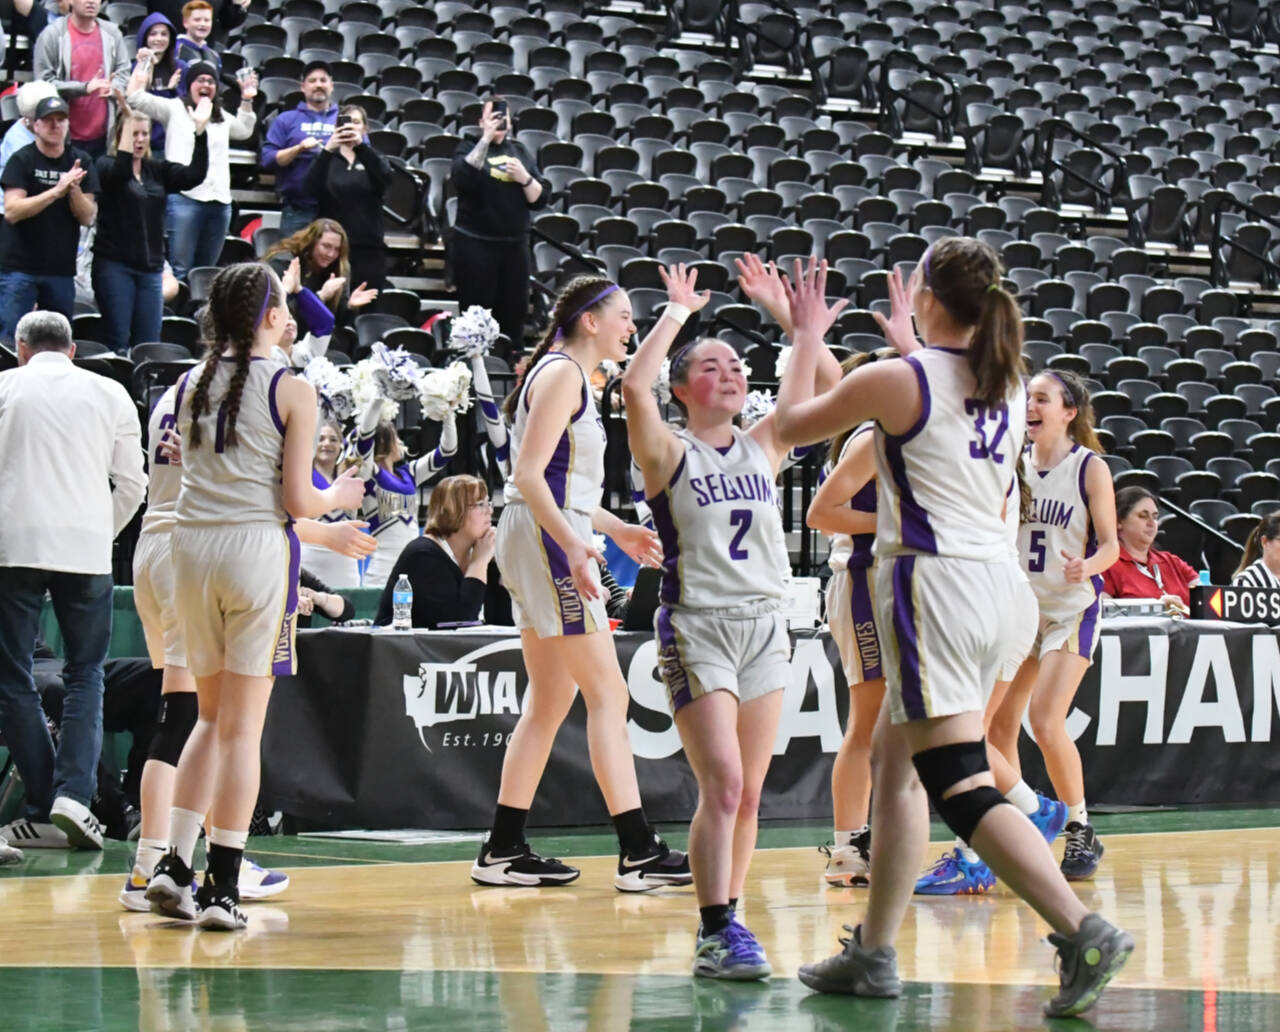 Photo by Jim Heintz / Sequim’s Hannah Bates (2) and Hailey Wagner (32) celebrate the Wolves’ Round of 12 victory of Sammamish at the class 2A state tournament in Yakima on March 1.